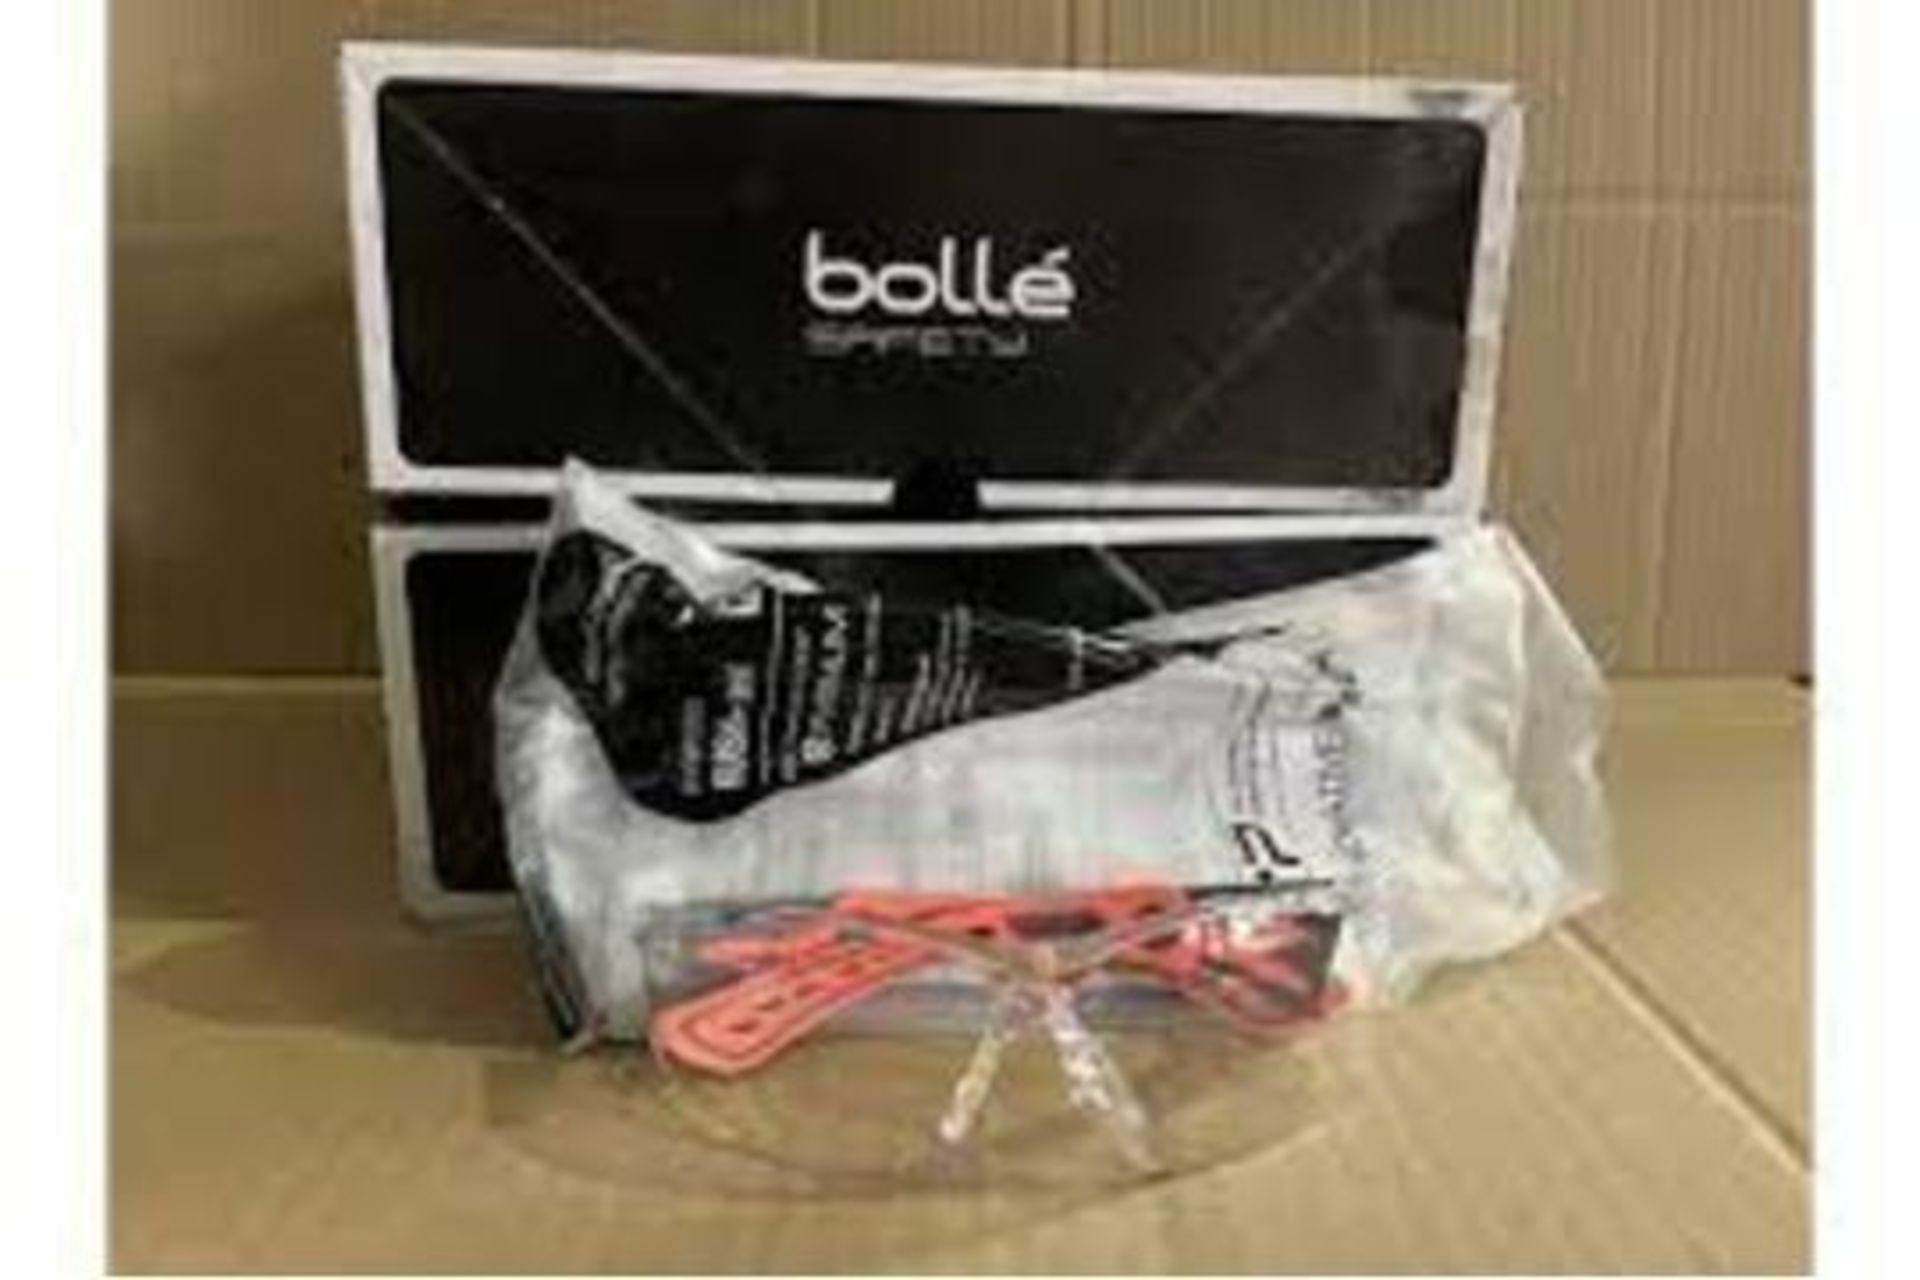 TRADE LOT 120 X BRAND NEW BOLLE SAFETY OVERLIGHT PROTECTIVE EYEWEAR RRP £14 EACH R15